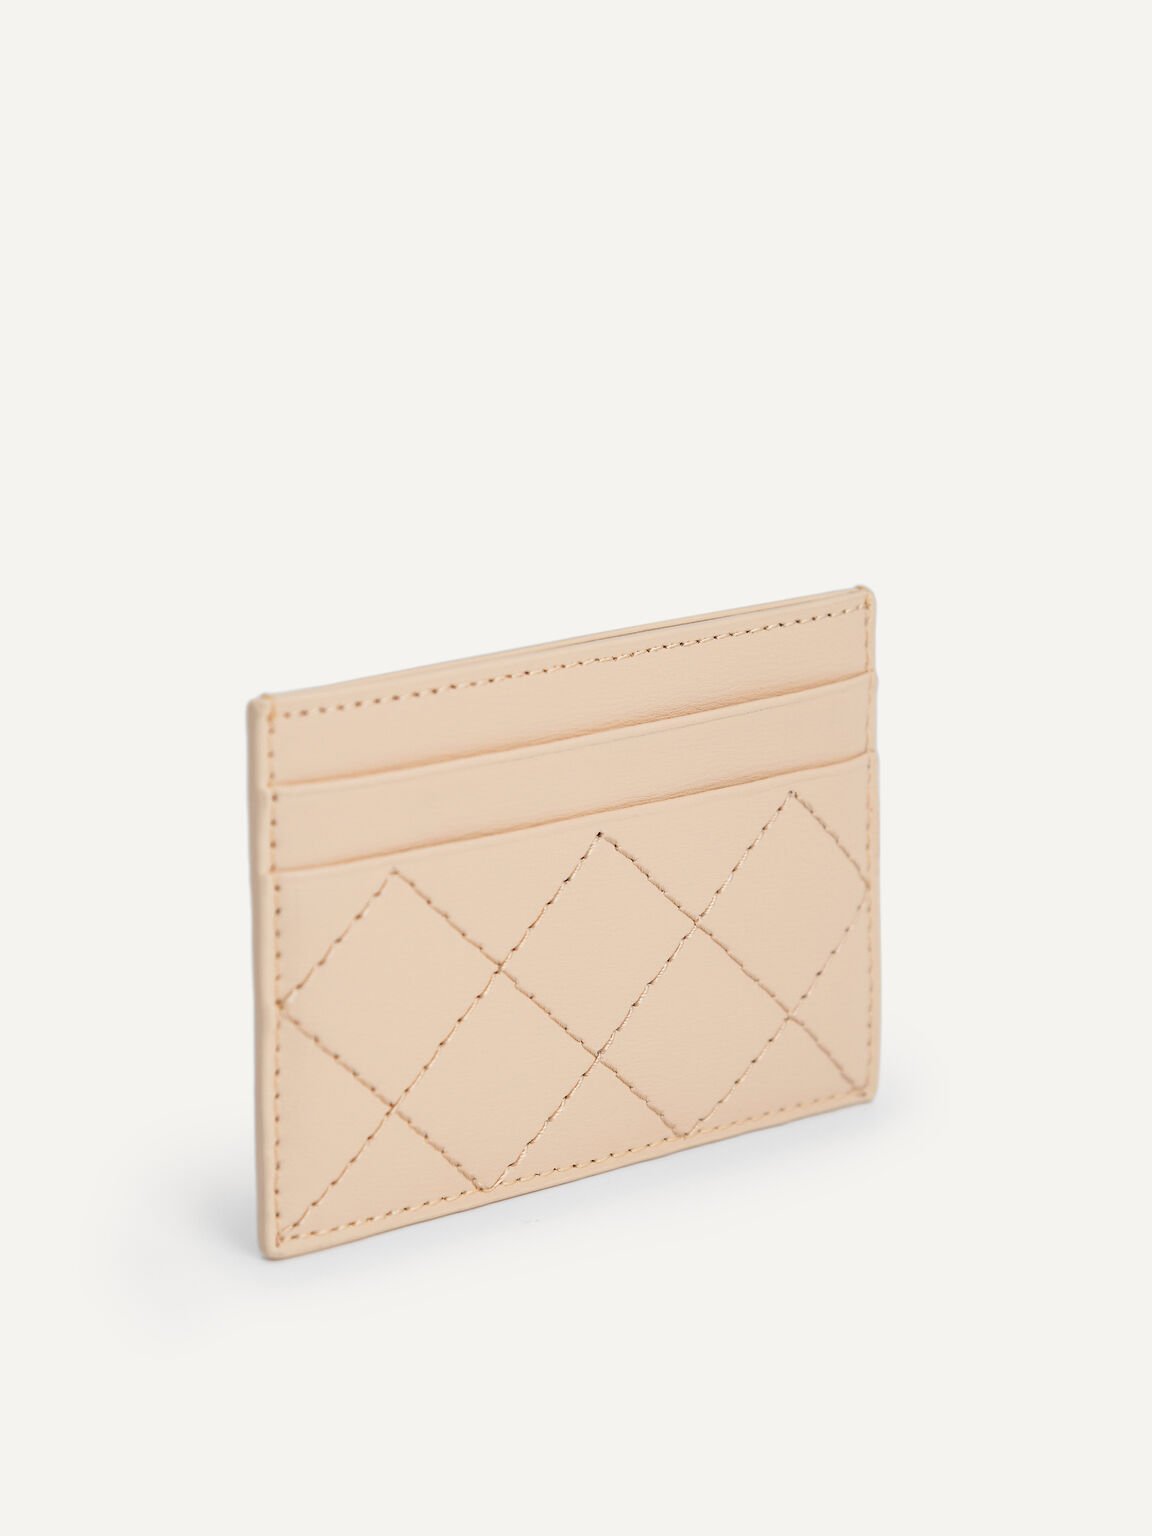 Criss-Cross Pattern Leather Cardholder, Nude